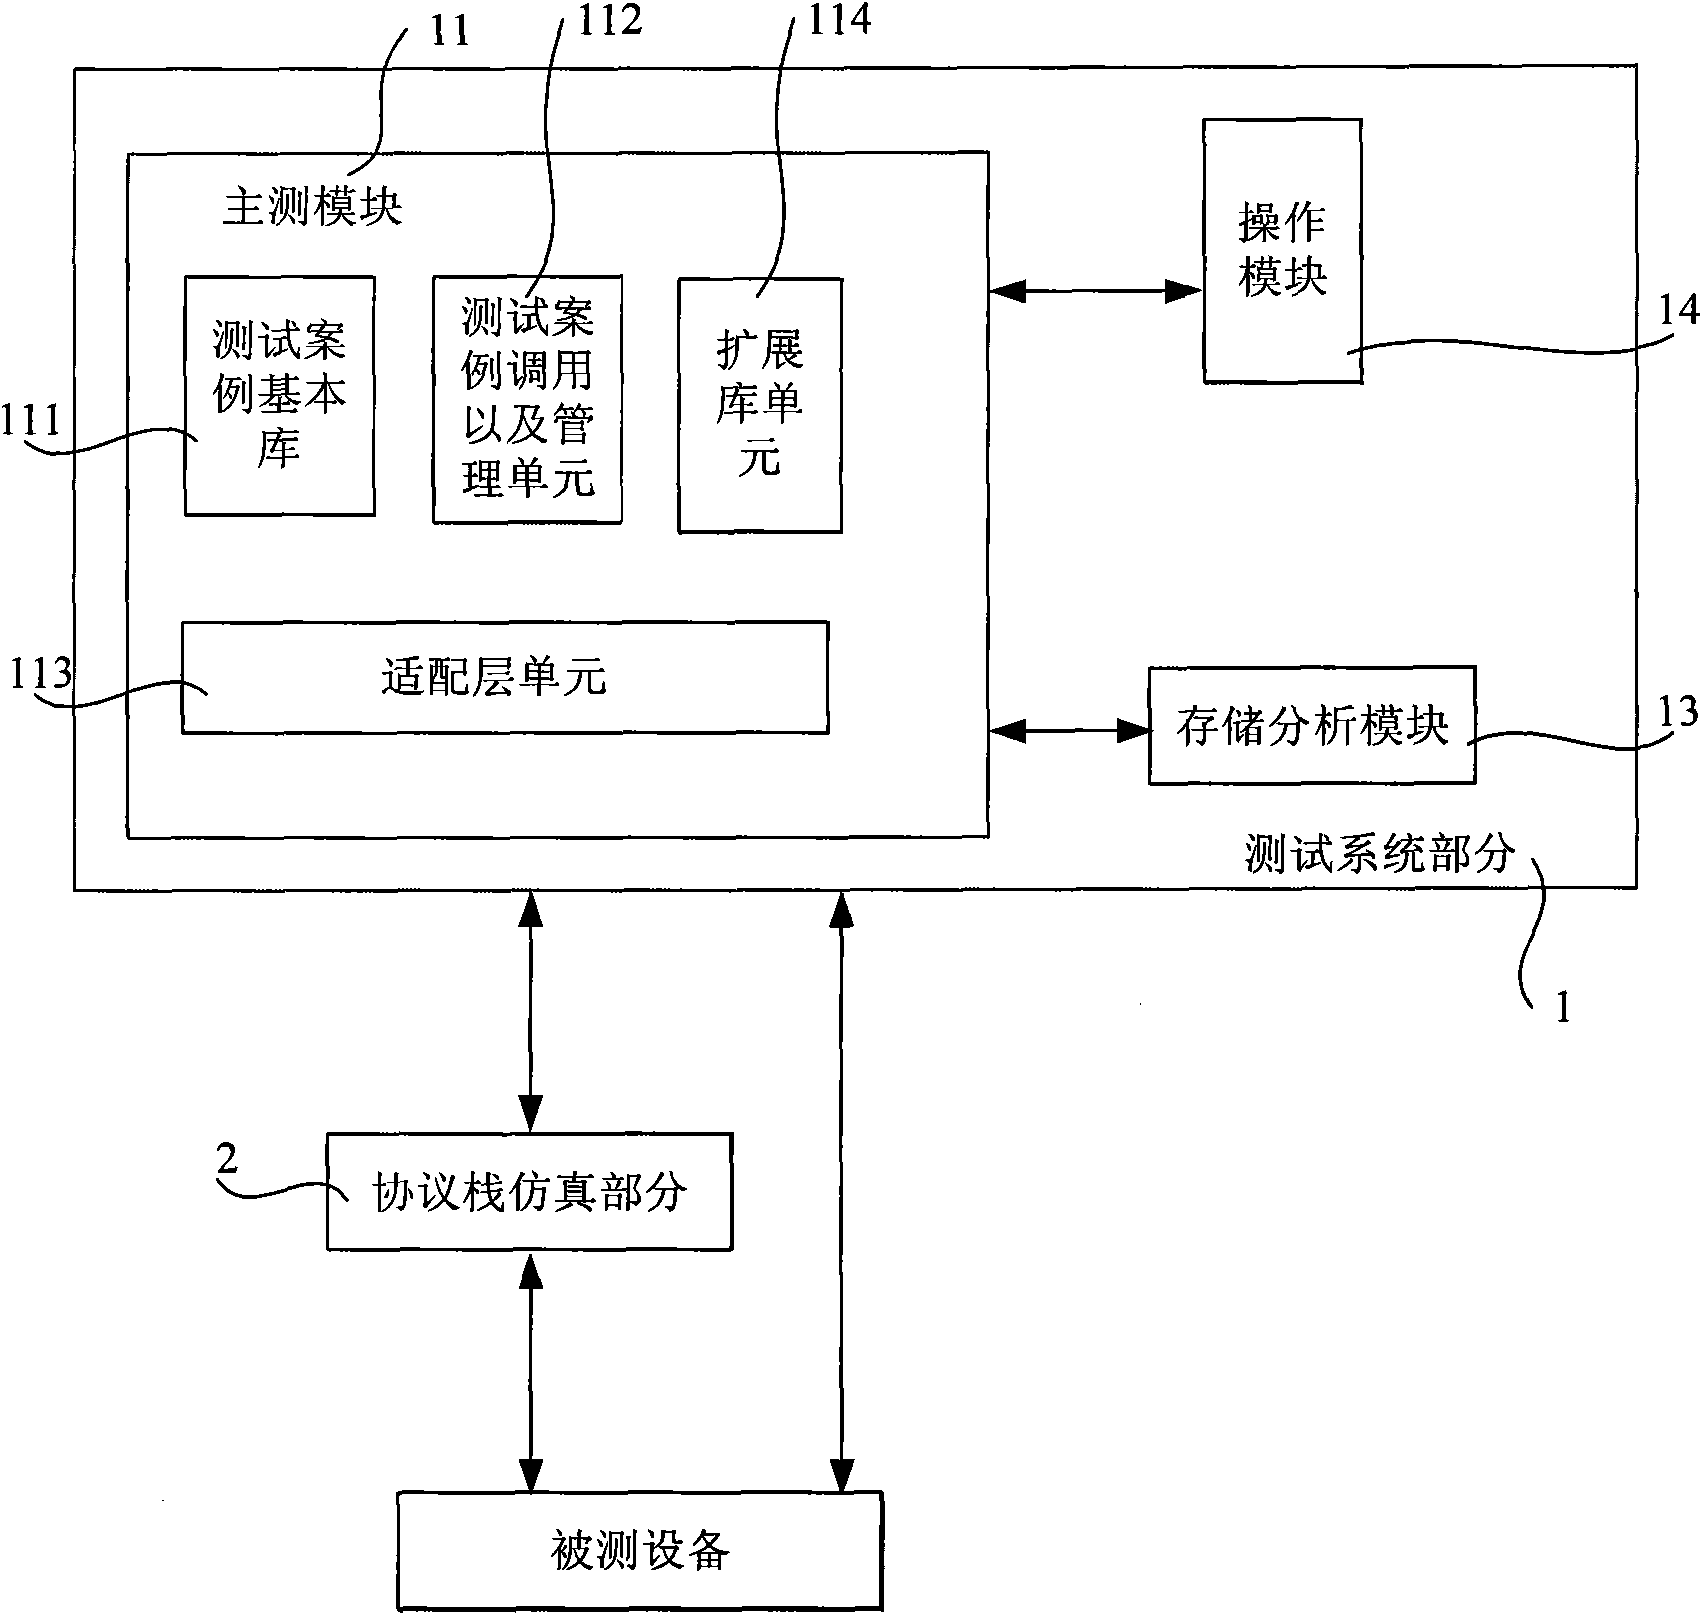 Testing platform for train-ground transmission protocol in train operation control system and construction method thereof